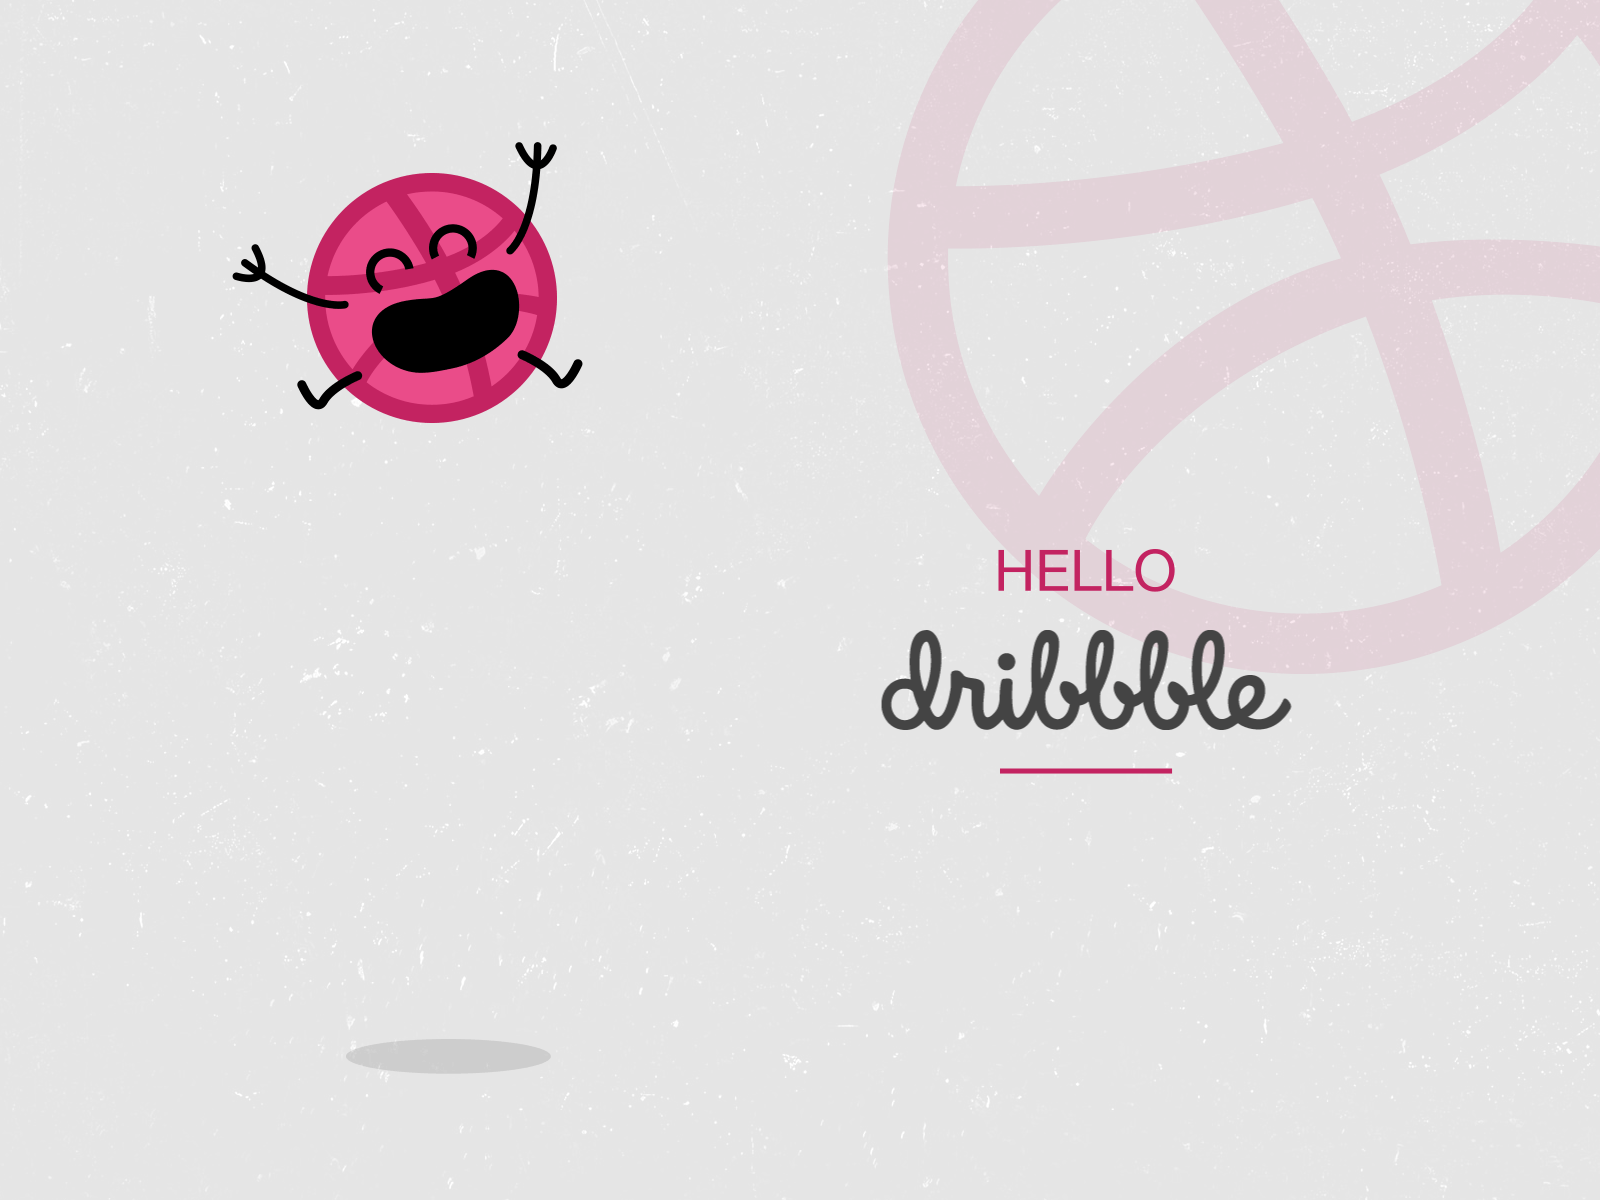 Hello Dribbble! animation ball bounce debut debut shot debutshot excited first shot happy hello hello dribble illustration motion vector welcome welcome shot